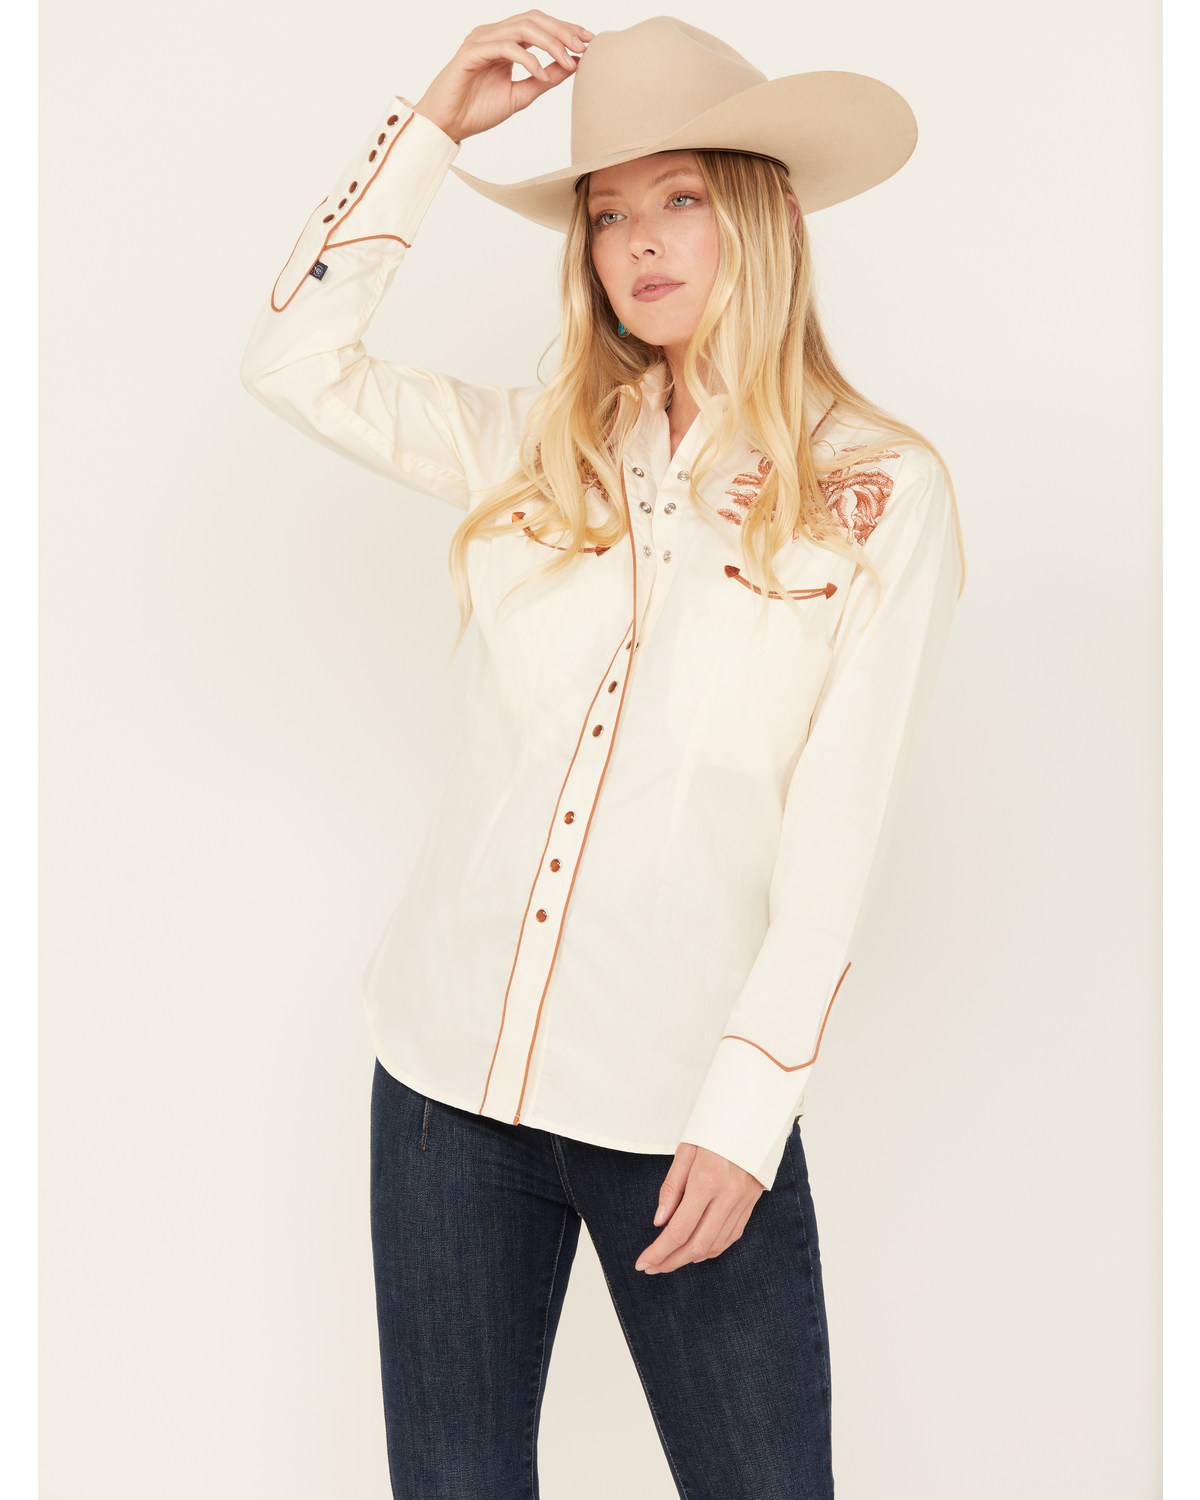 Rockmount Ranchwear Women's Embroidered Scenic Long Sleeve Pearl Snap Western Shirt